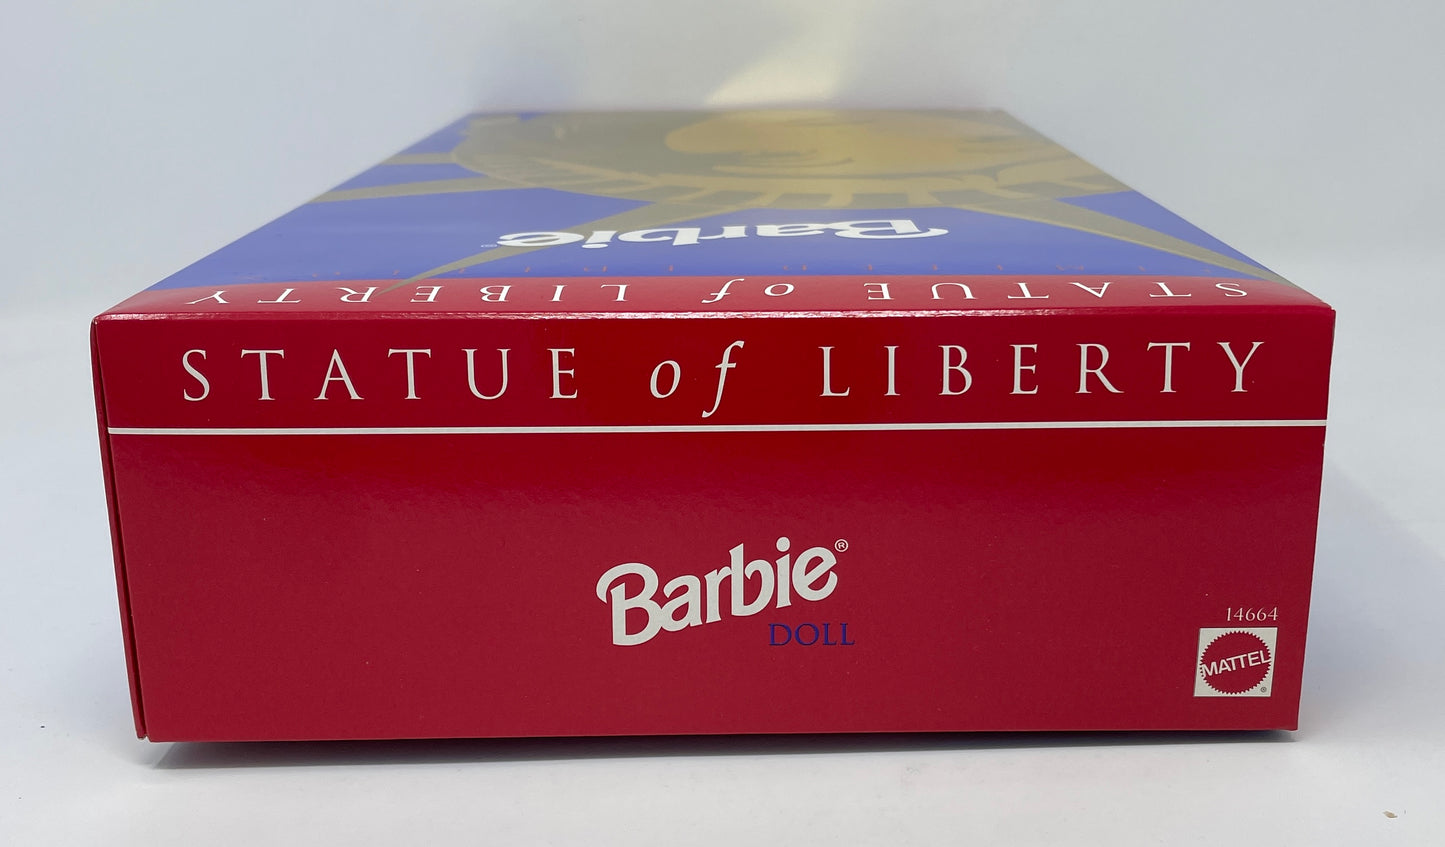 STATUE OF LIBERTY BARBIE - LIMITED EDITION - FAO SCHWARZ AMERICAN BEAUTIES COLLECTION - #14664 - MATTEL 11995